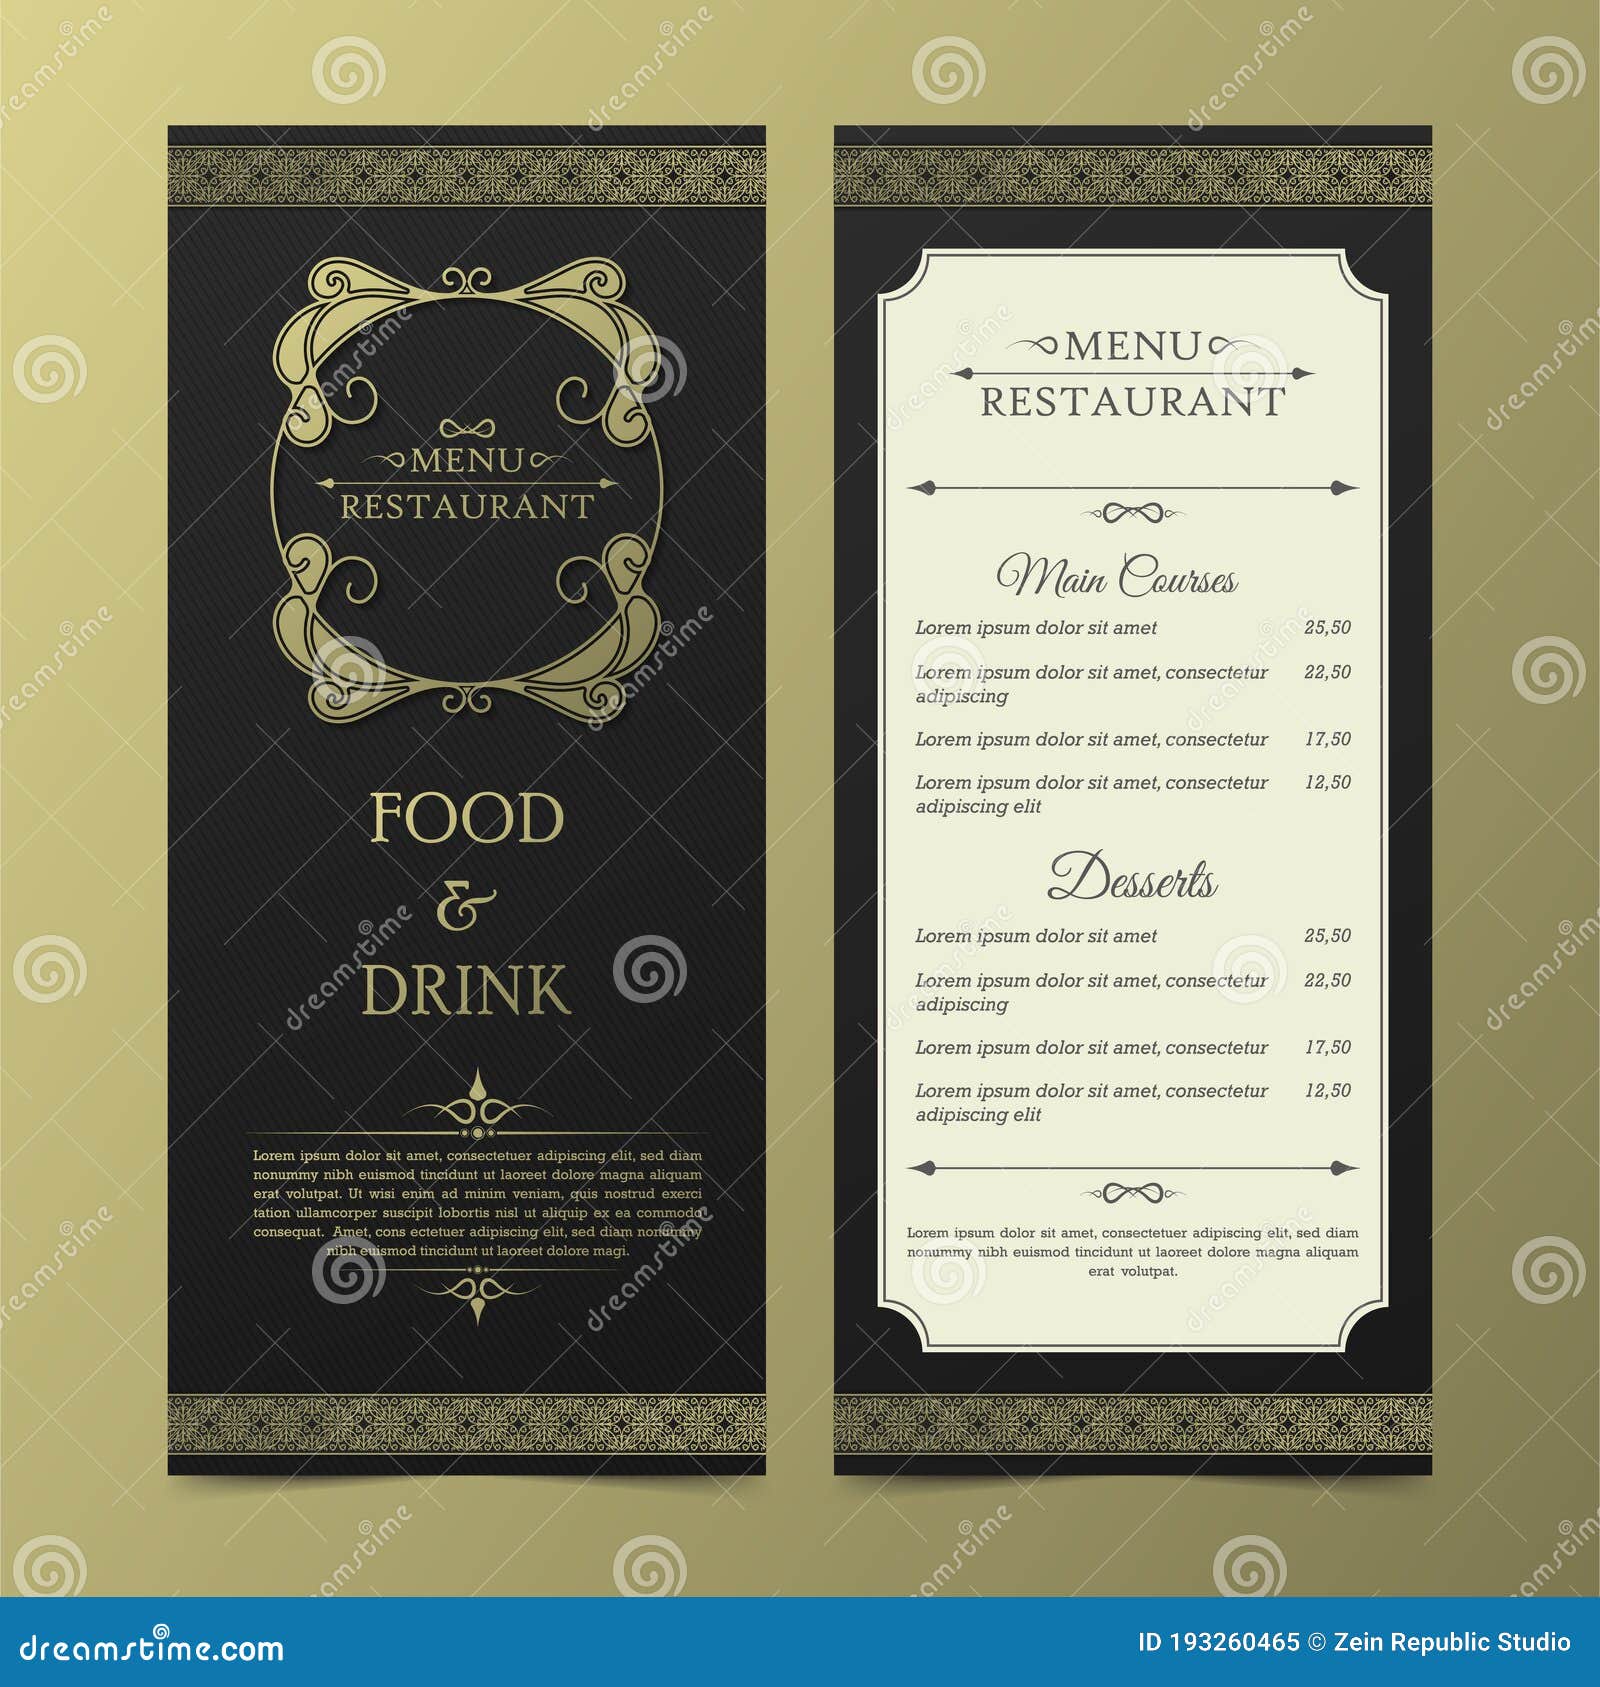 156 Creative Restaurant Menu Cover Design Label Photos Free Royalty Free Stock Photos From Dreamstime